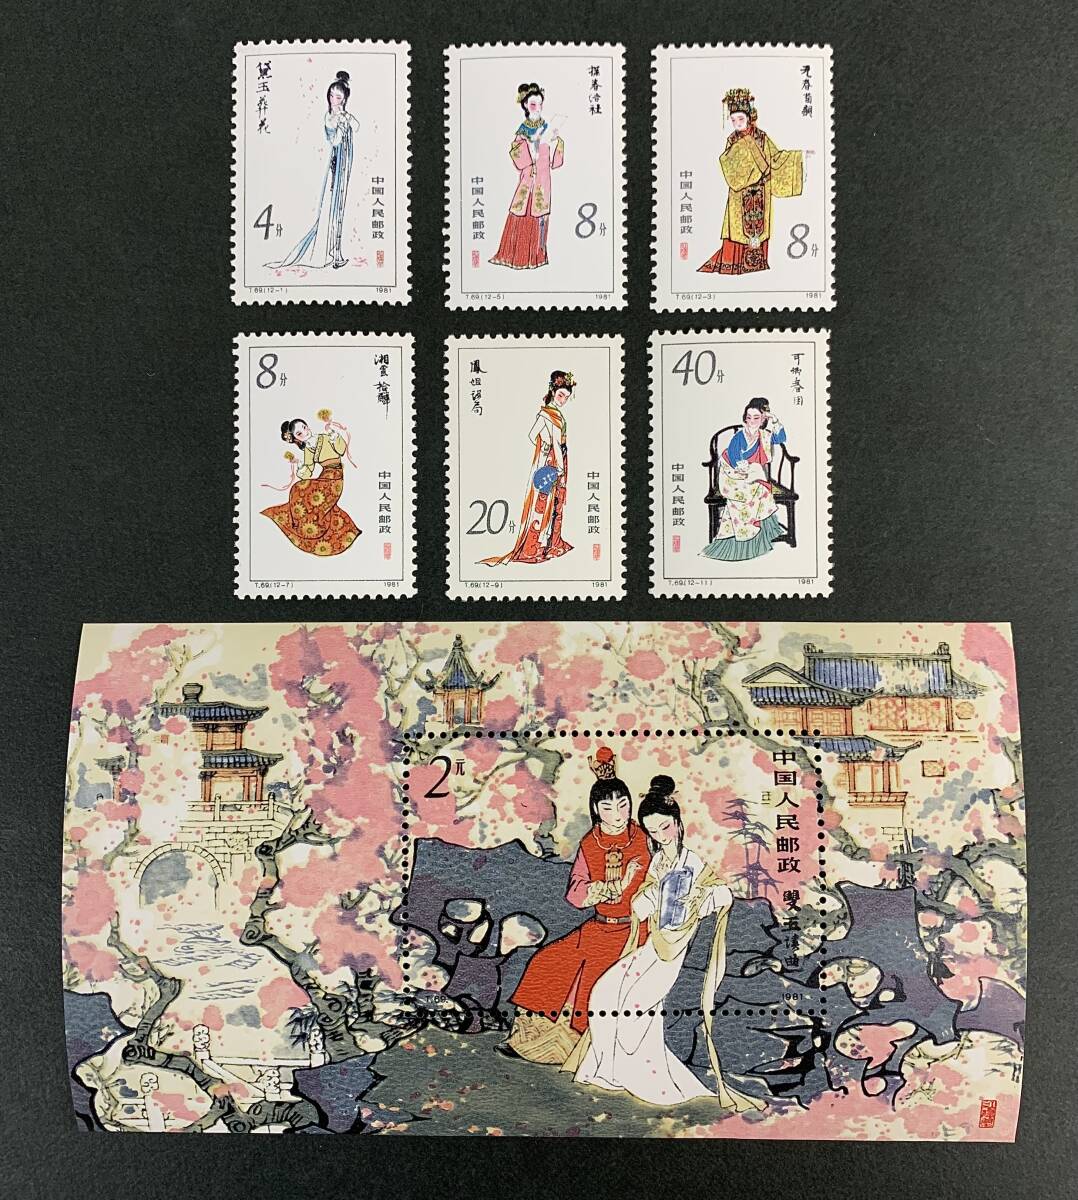  China stamp * unused *T69.. dream small size seat + rose 6 sheets 1981 year 